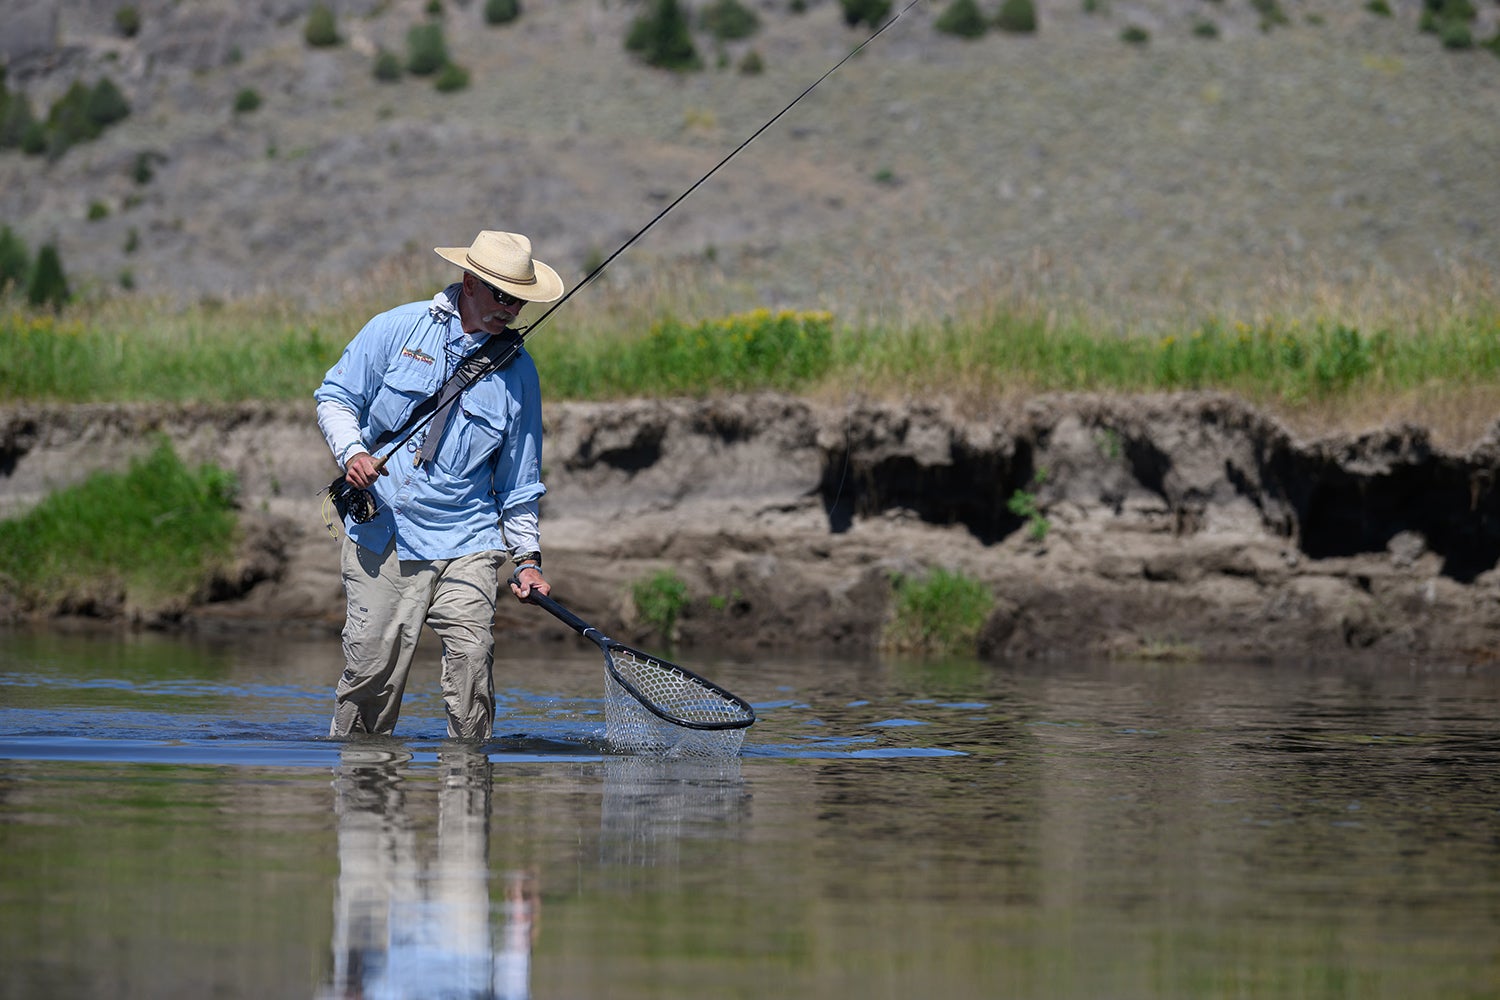 Weamer nets a fish for tagging in Yellowstone